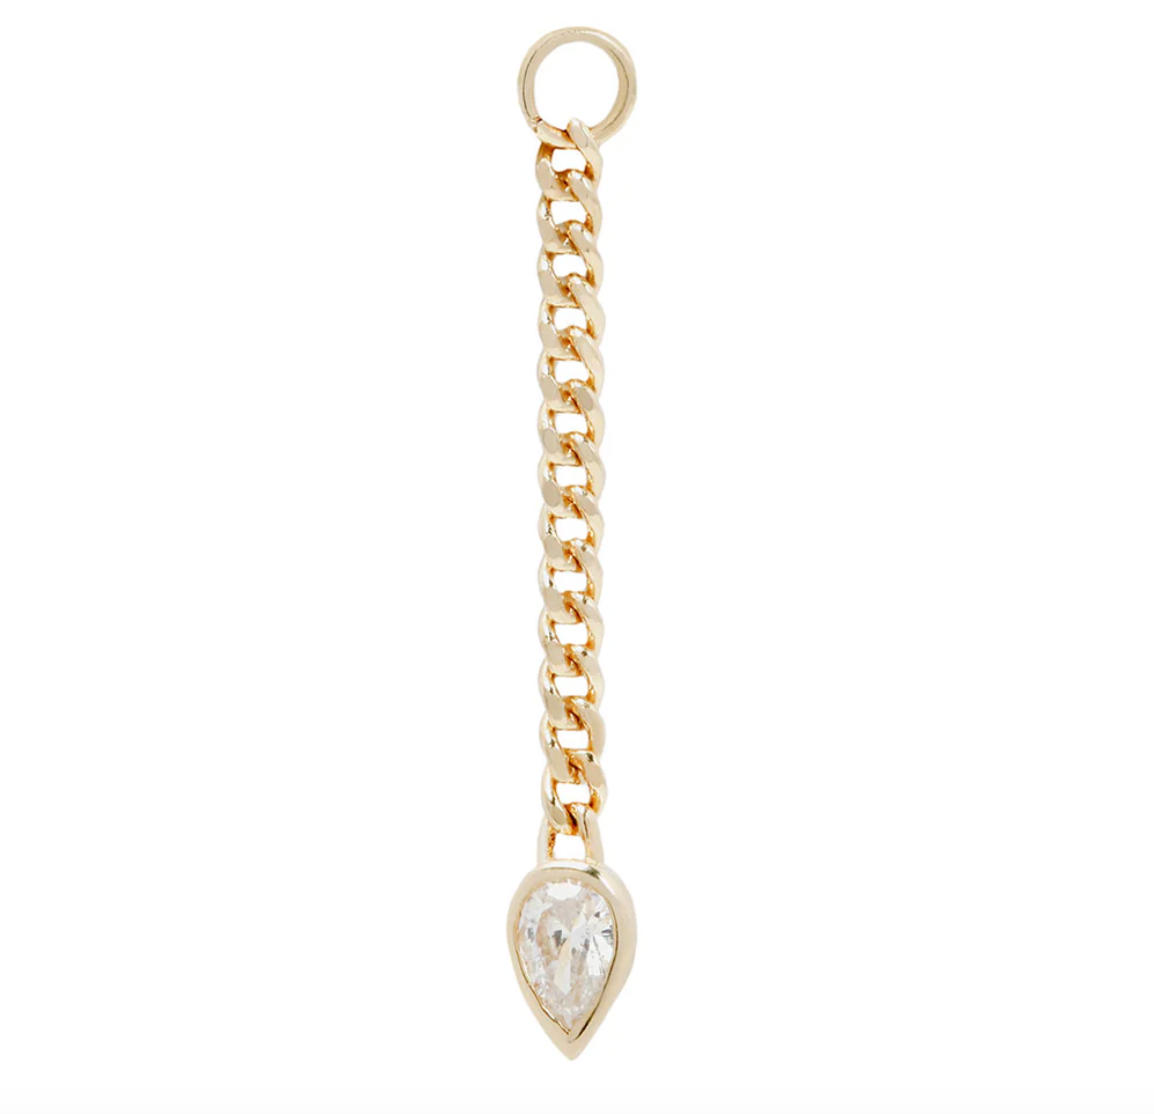 gold chain earring charm with a pear shaped cubic zirconia on a white background